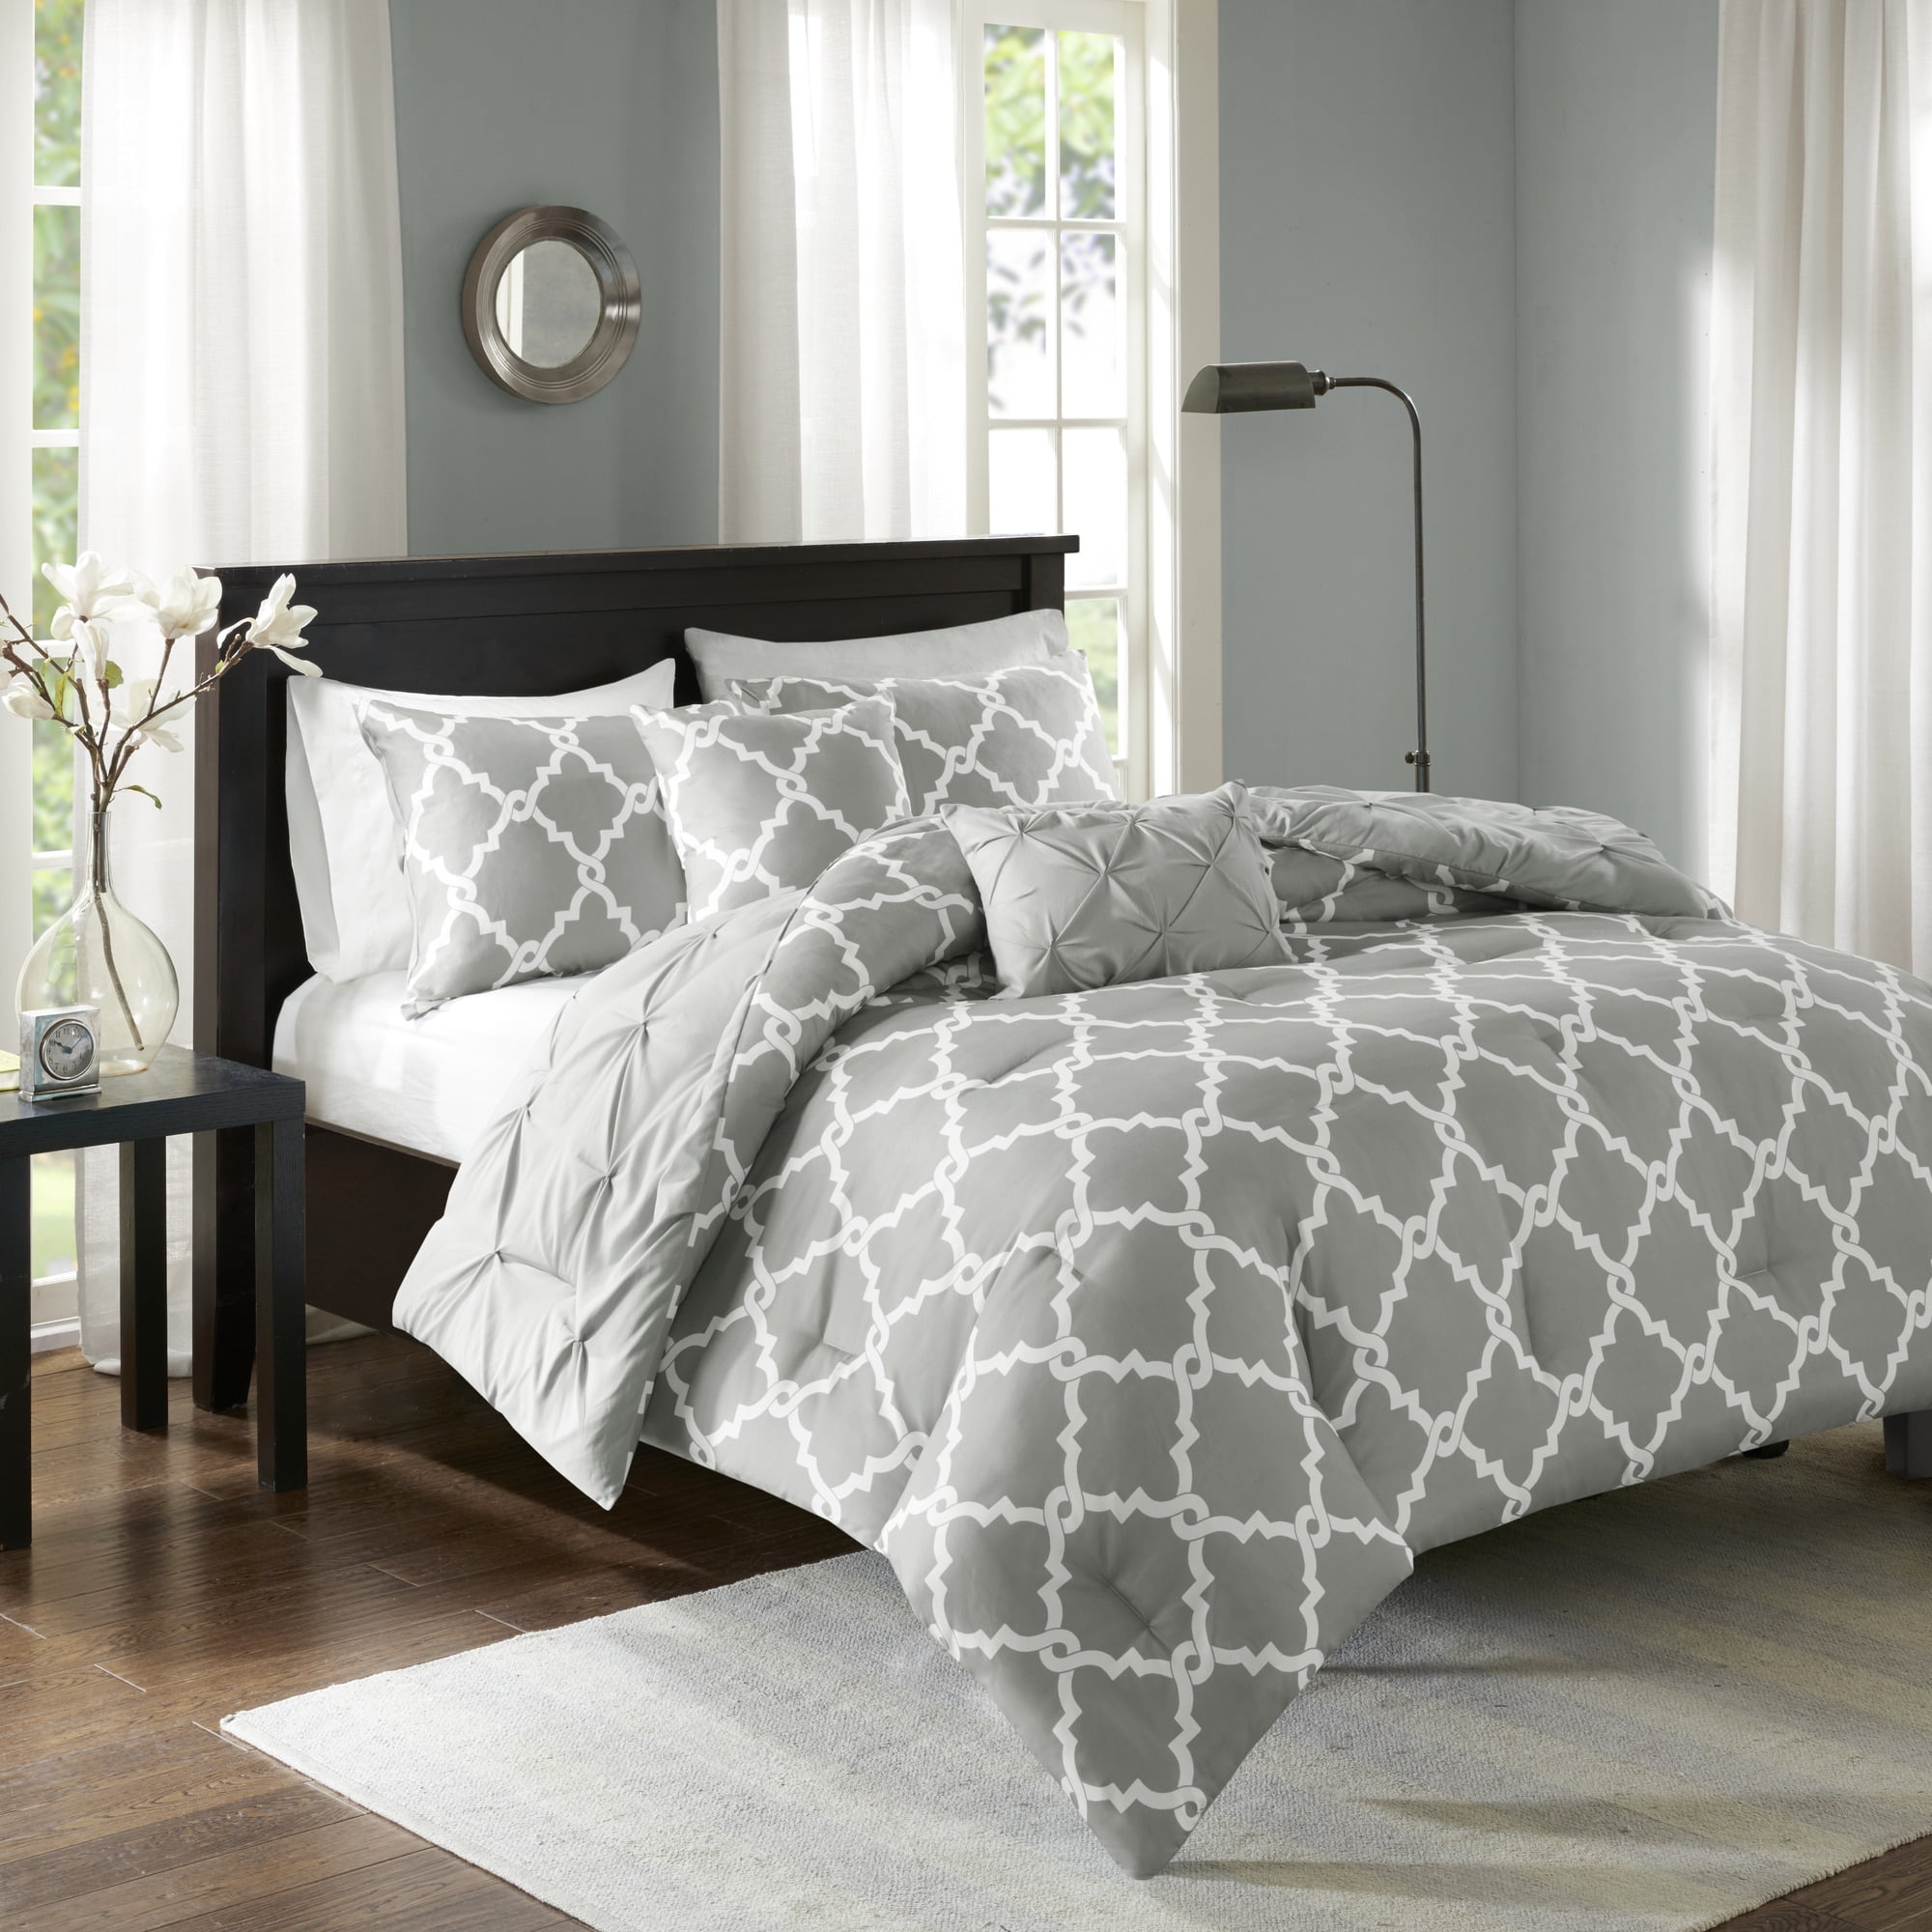 SINGLE or QUEEN Eve Grey Reversible Comforter Set by Apartmento 